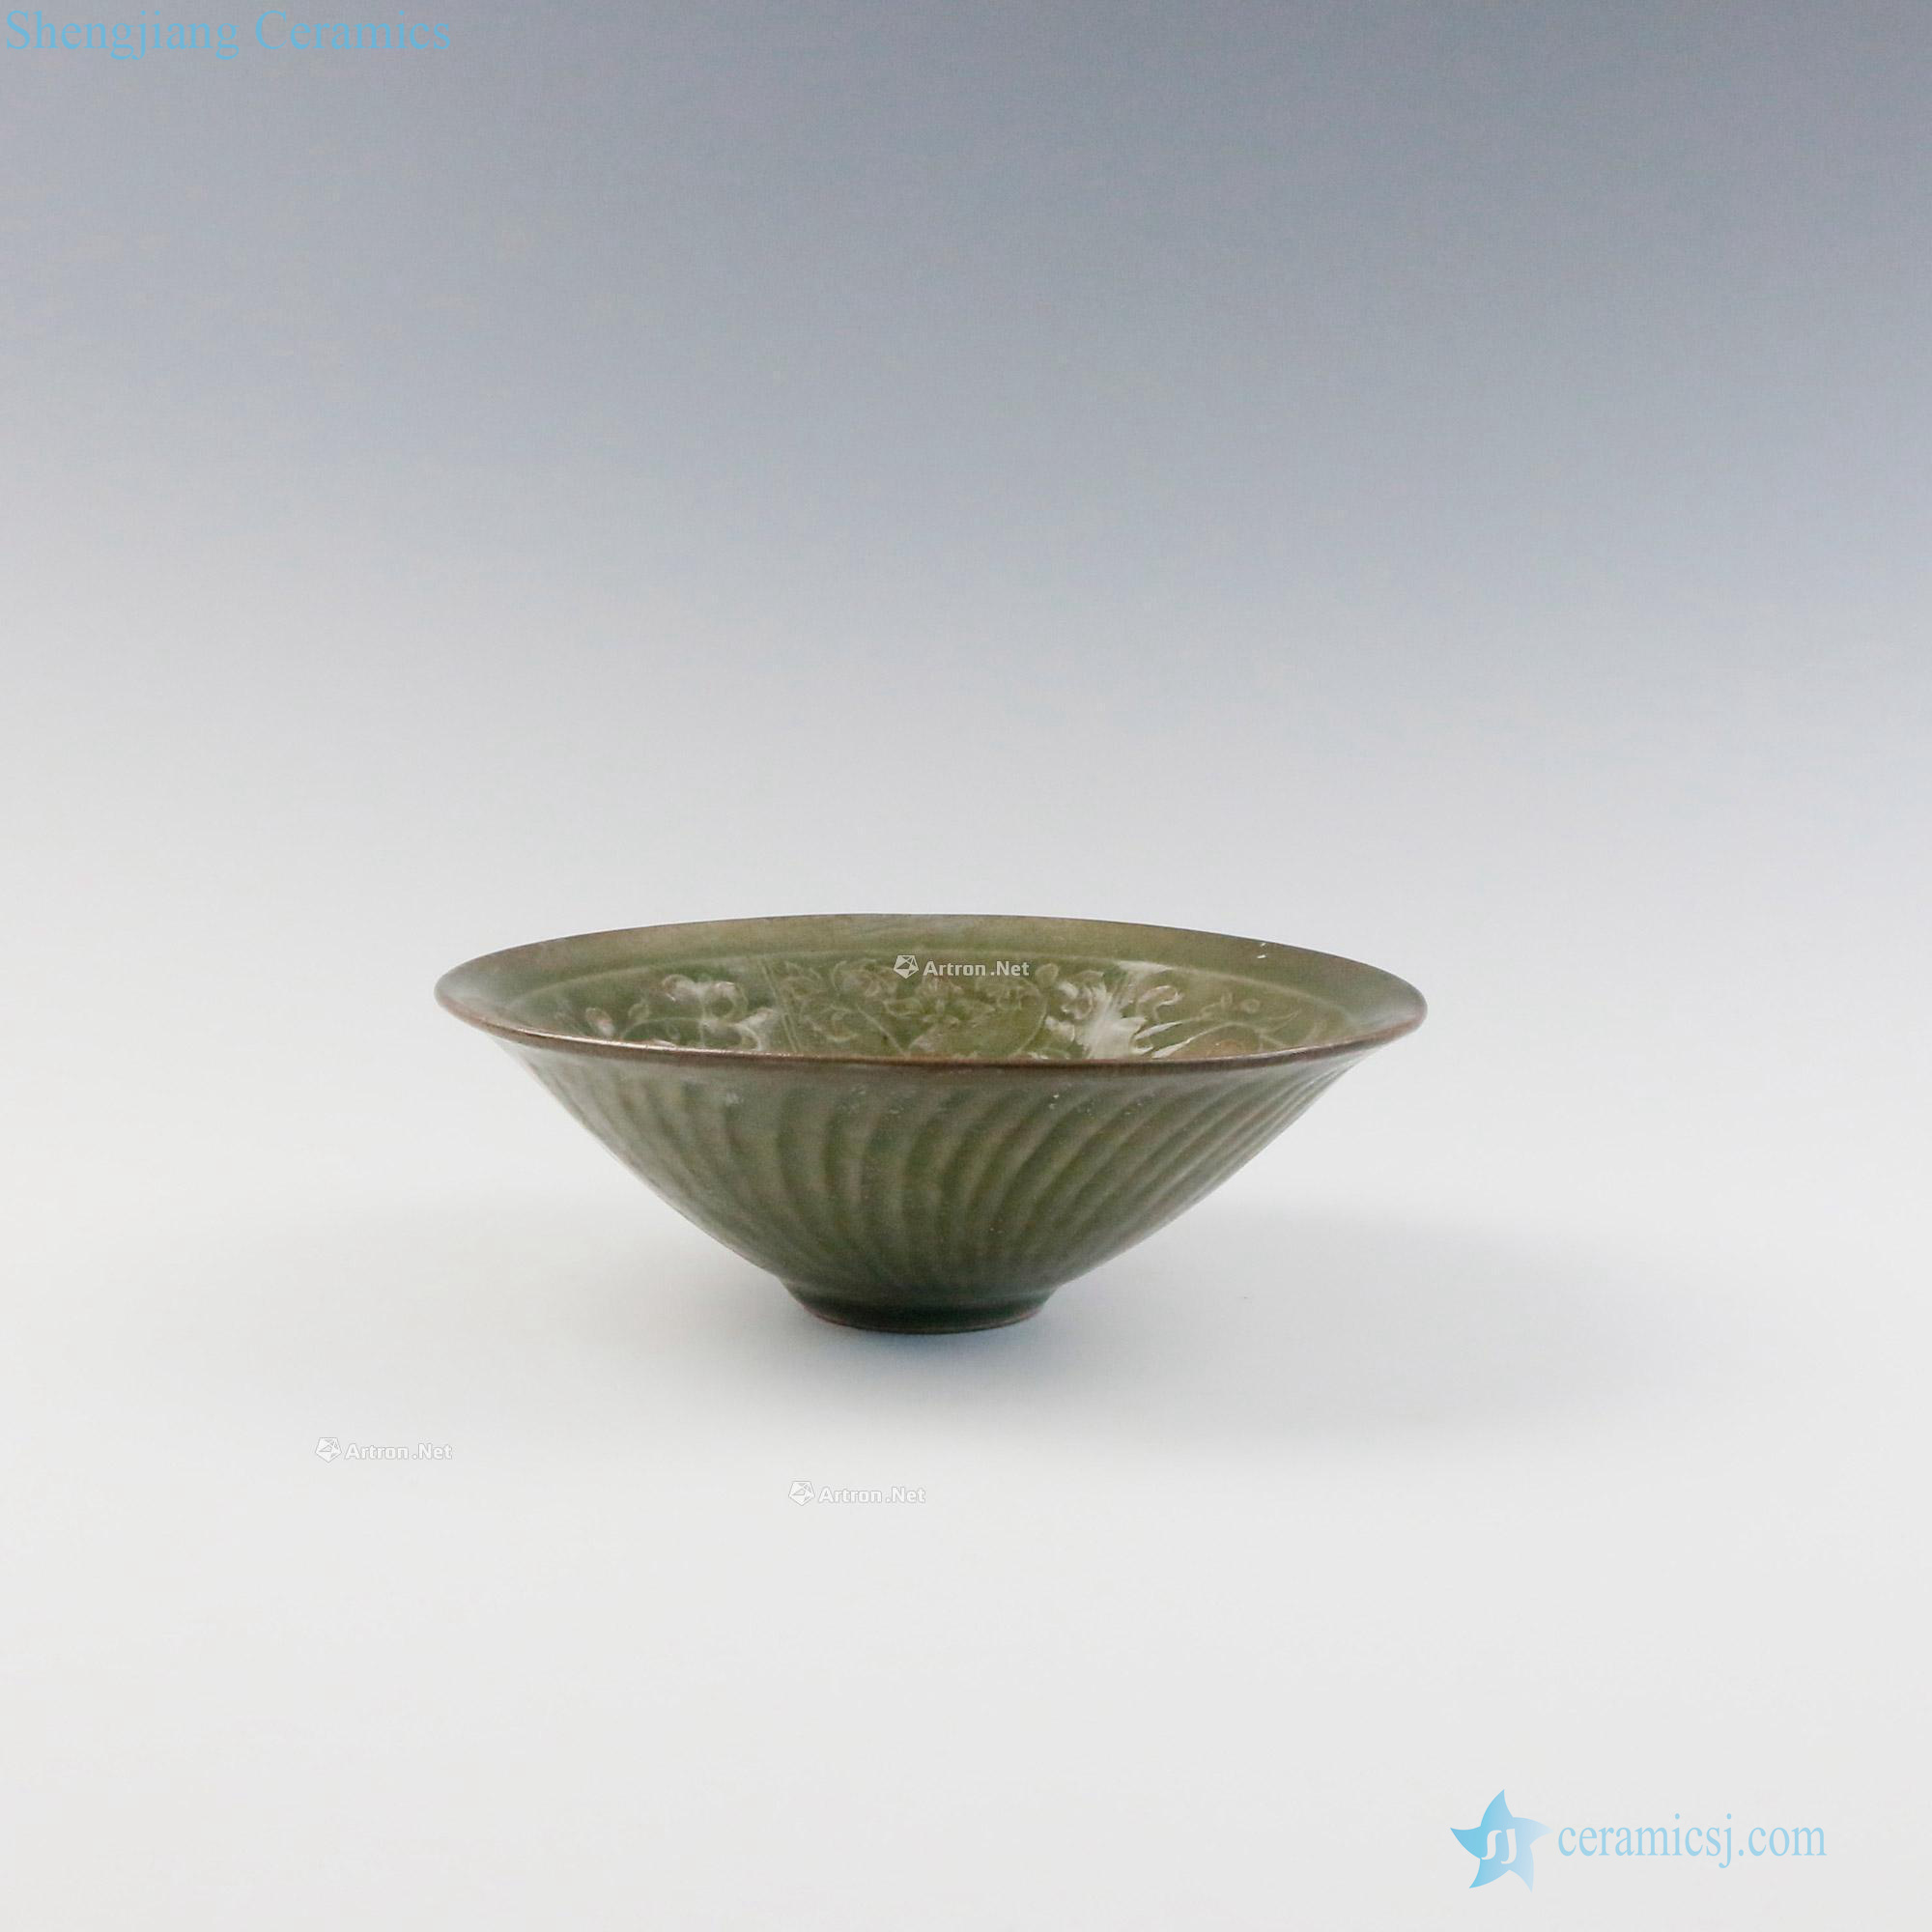 The song dynasty Yao state kiln hand-cut hat to bowl